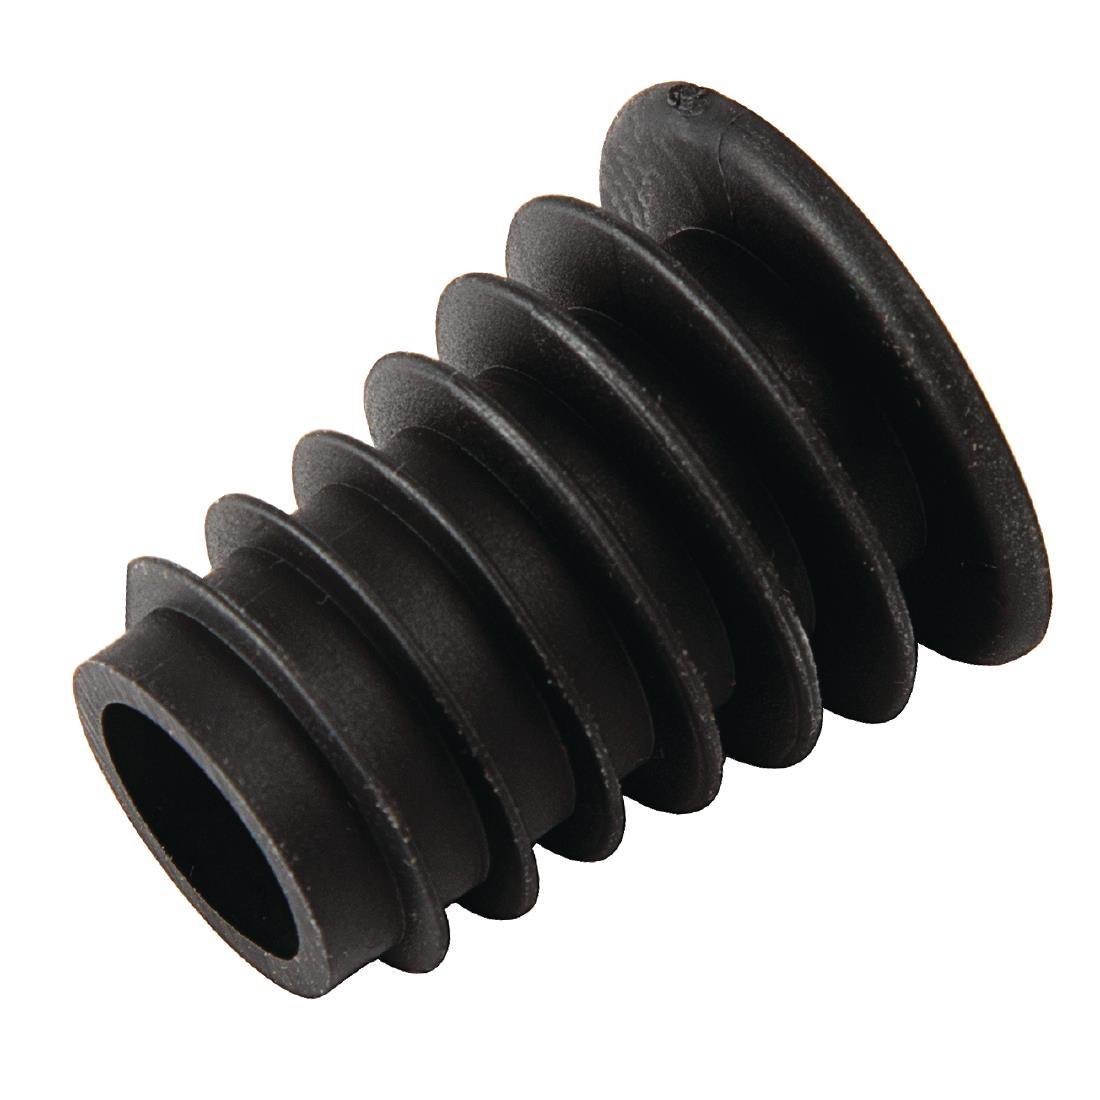 Beaumont Replacement Optic Inserts (Pack of 20) - GK109  - 1